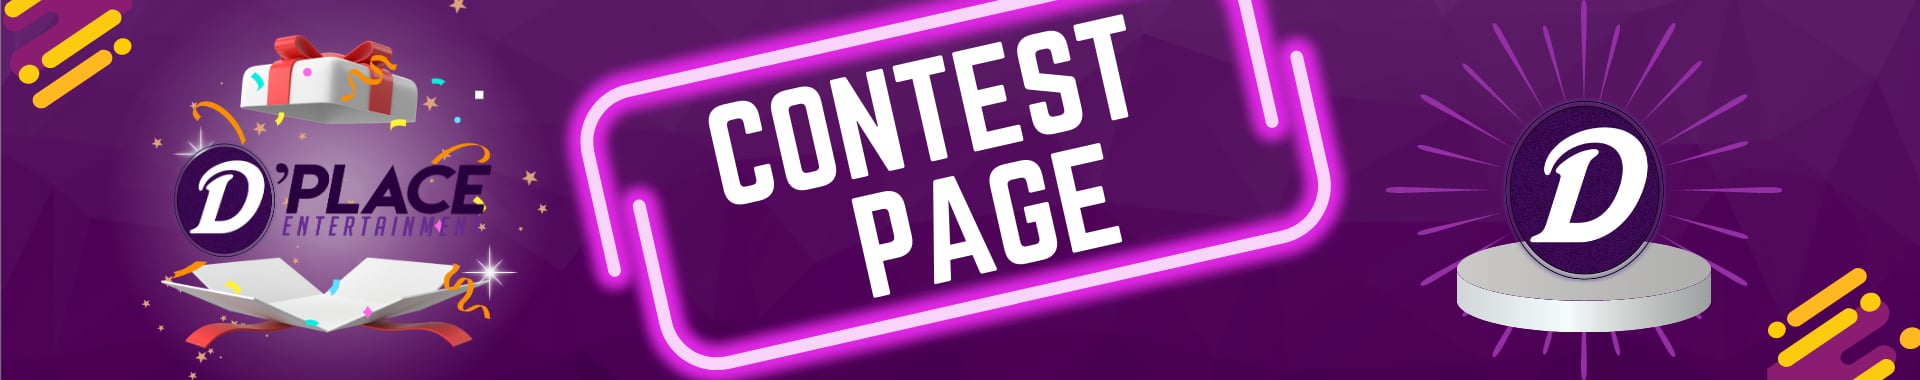 Contest Page